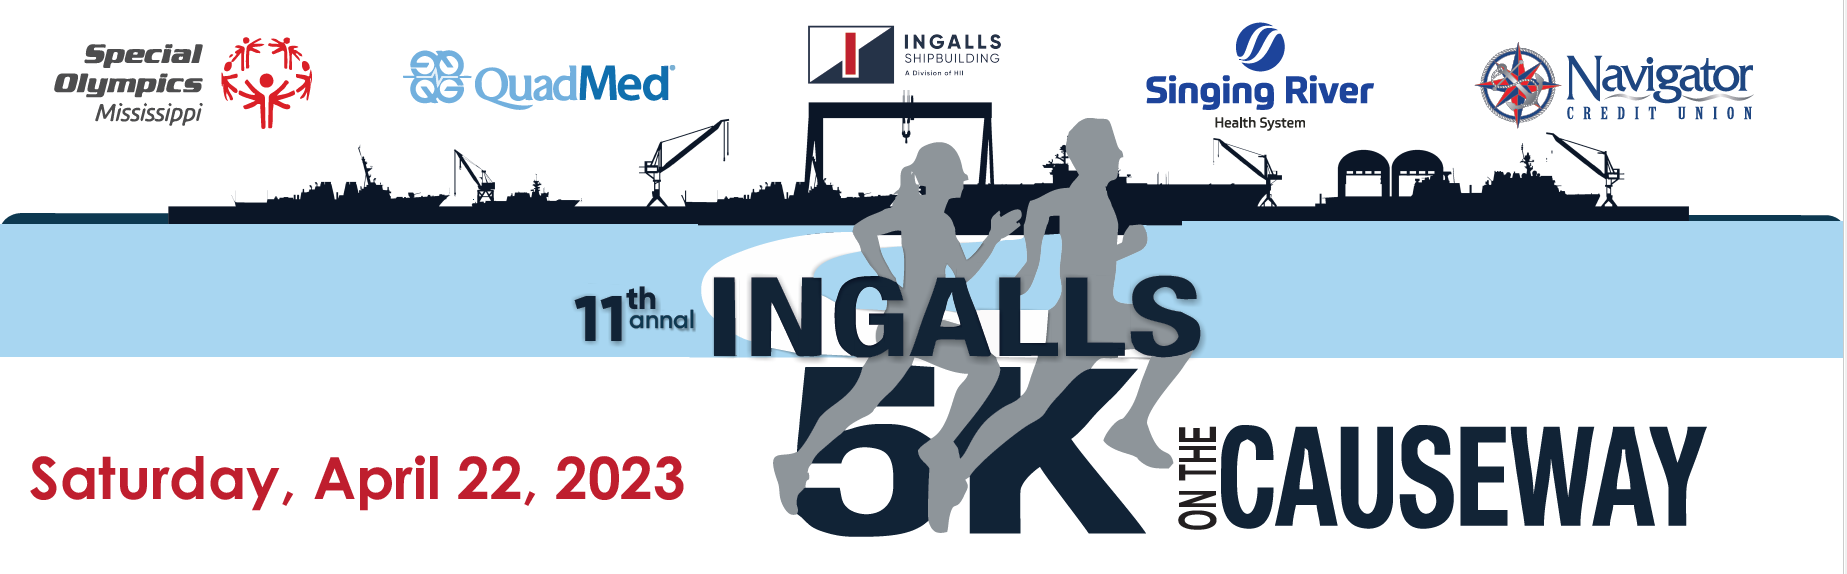 11th Annual Ingalls 5K on the Causeway